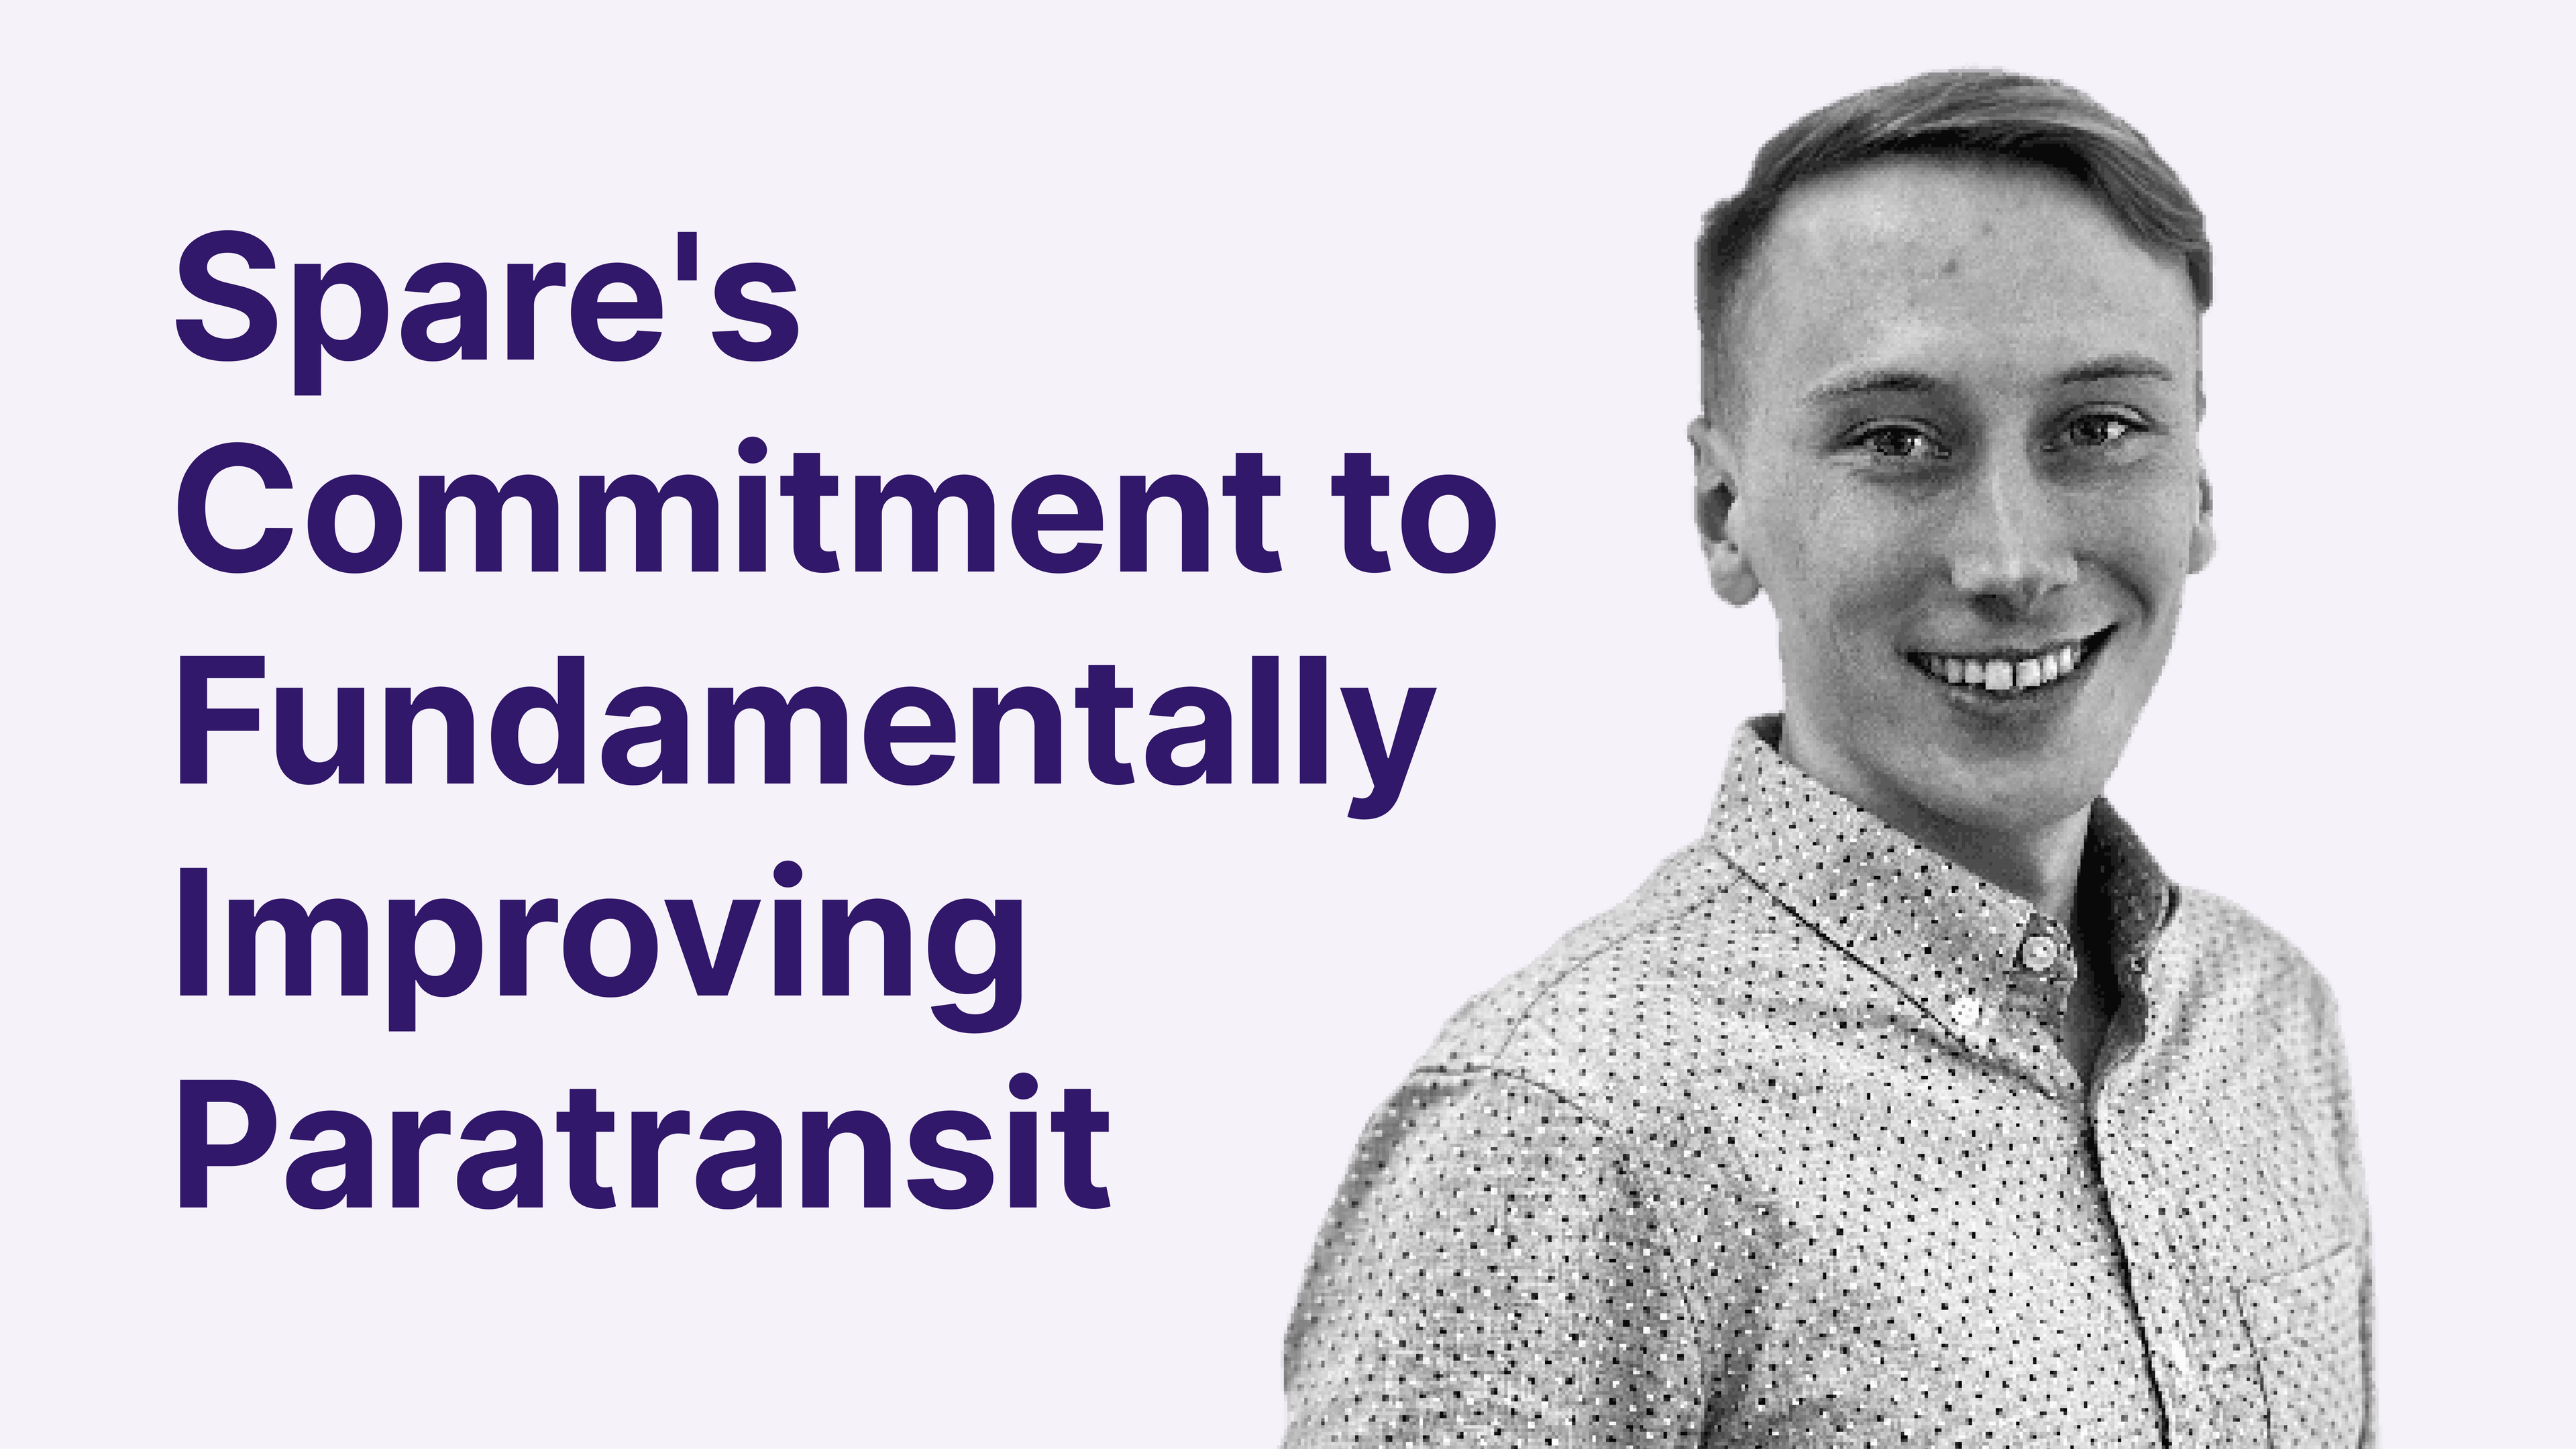 Shaping the Future of Mobility: Spare's Commitment to Fundamentally Improving Paratransit